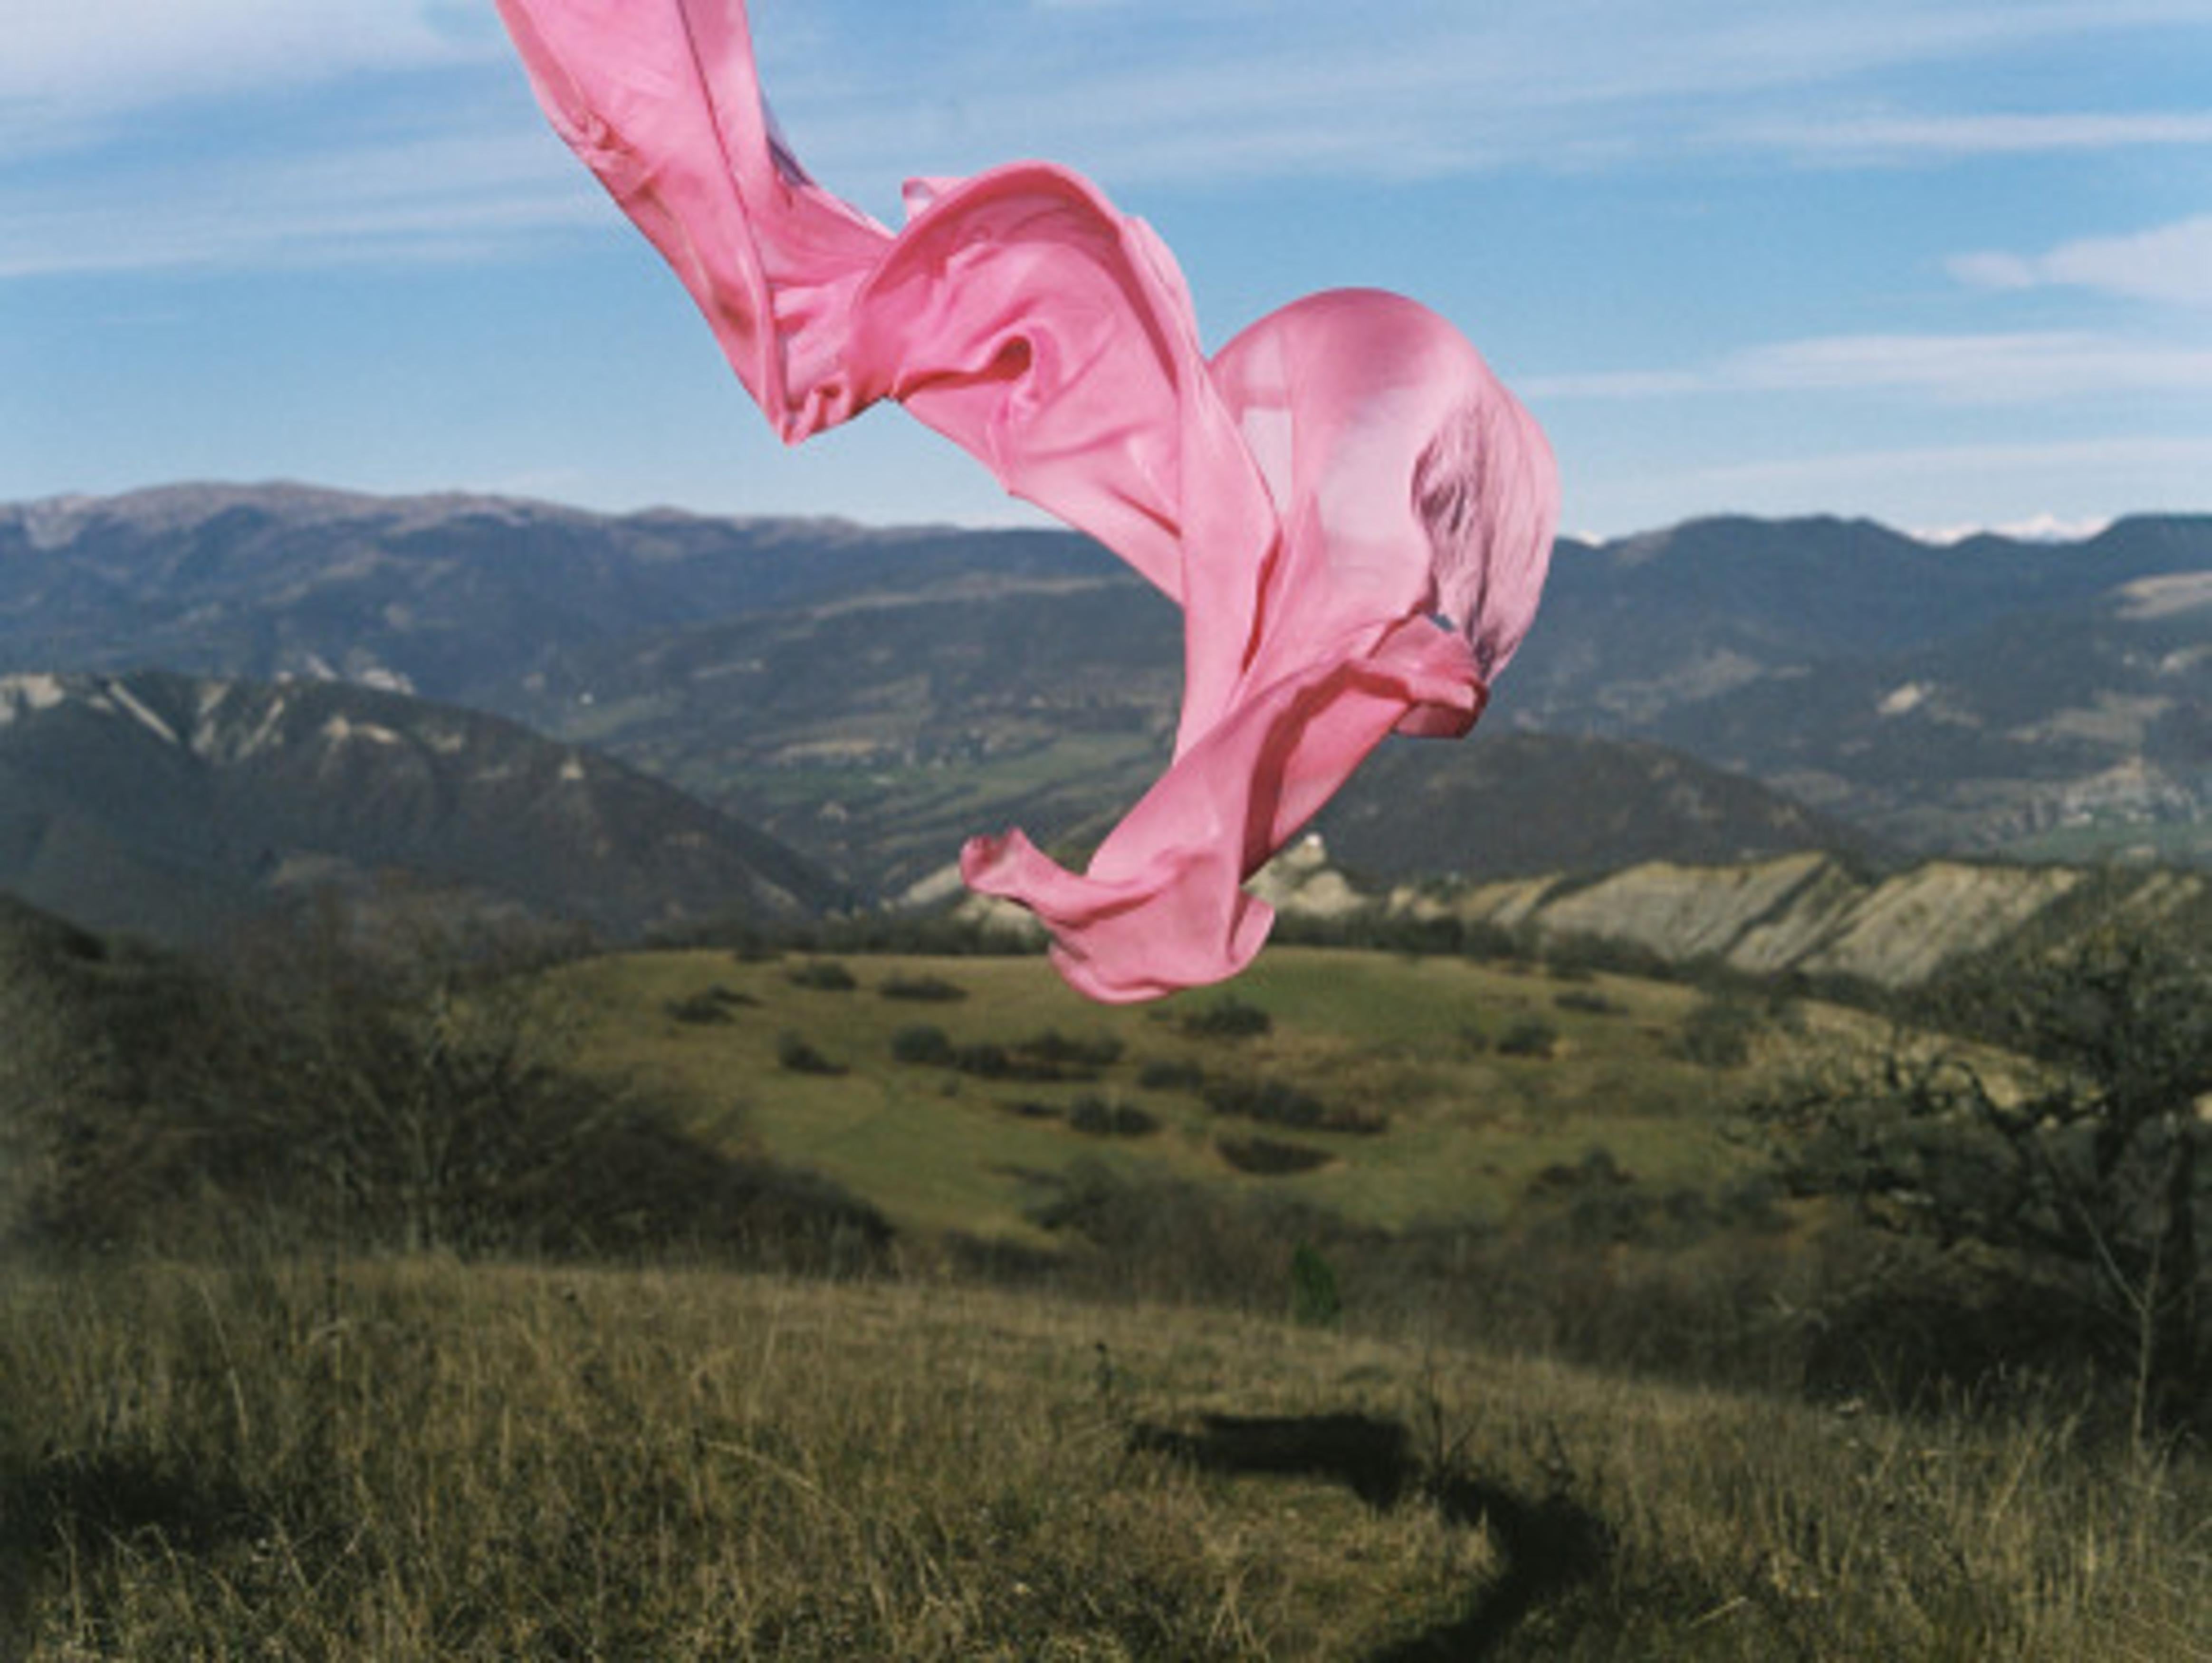 Weightlessness - Photograph by Mariam Sitchinava